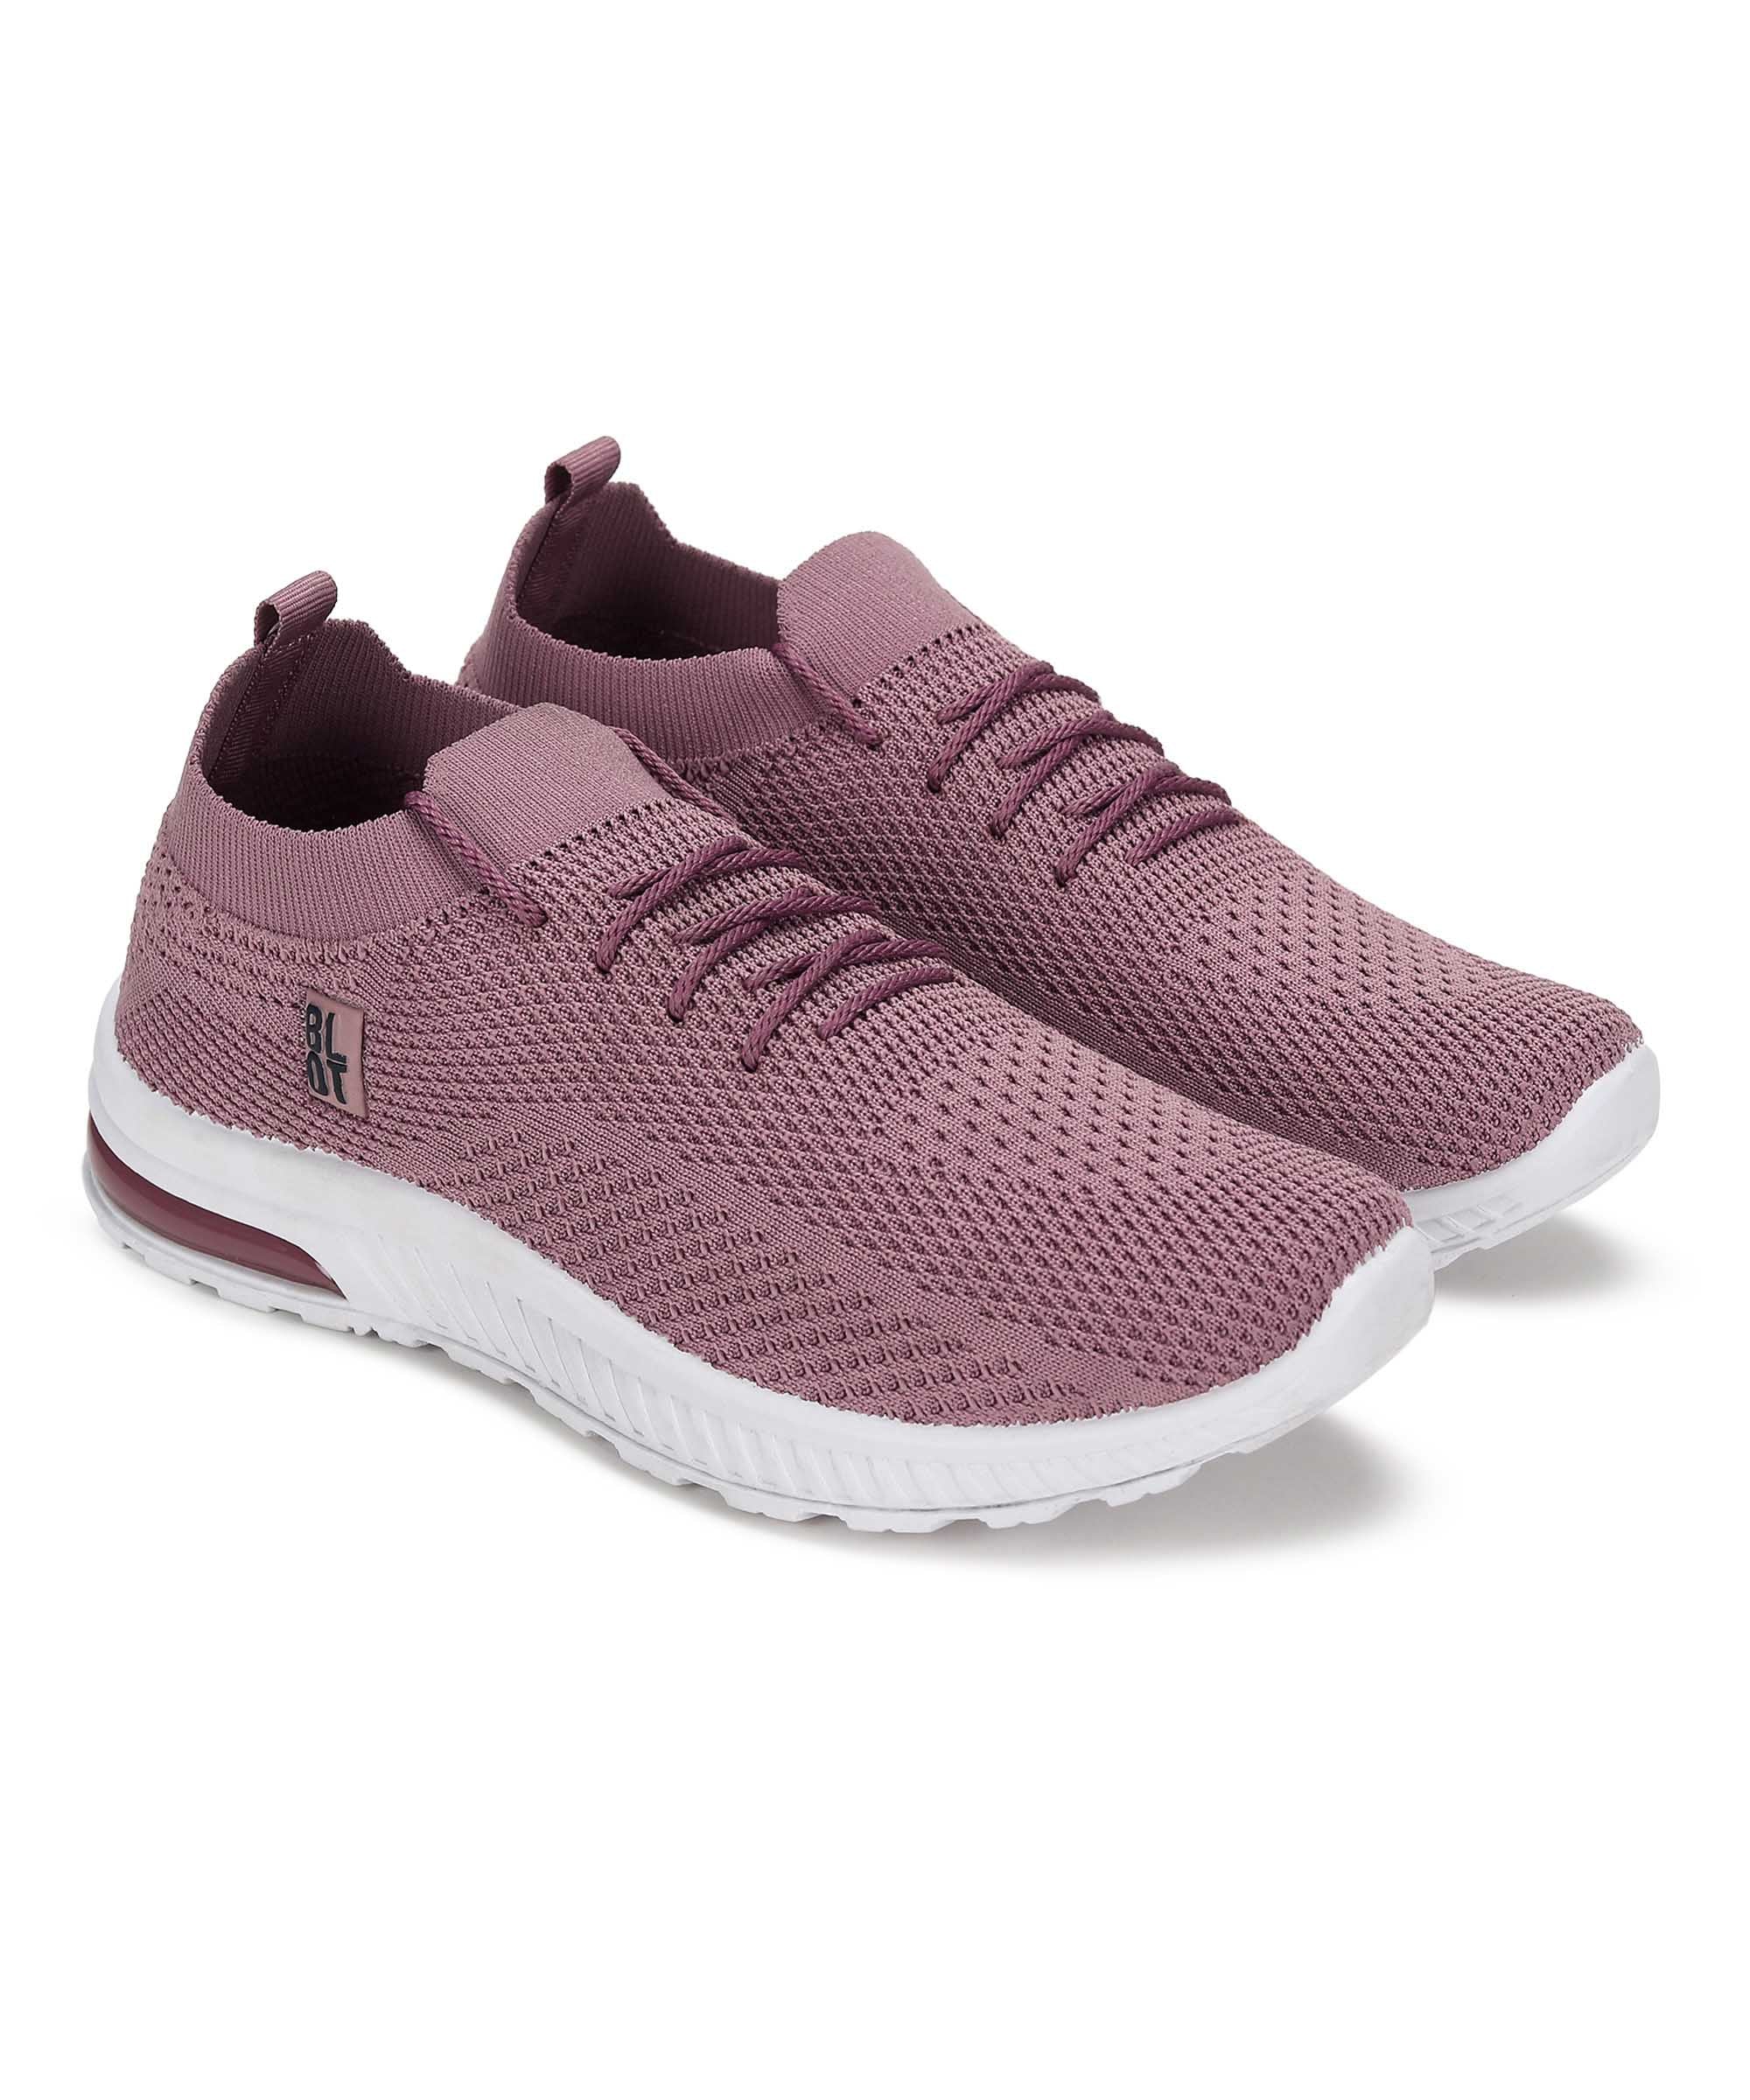 Paragon K1016L Women Sports Shoes | Walking Running Gym Shoes | Breathable Comfortable Sole with Cushioning